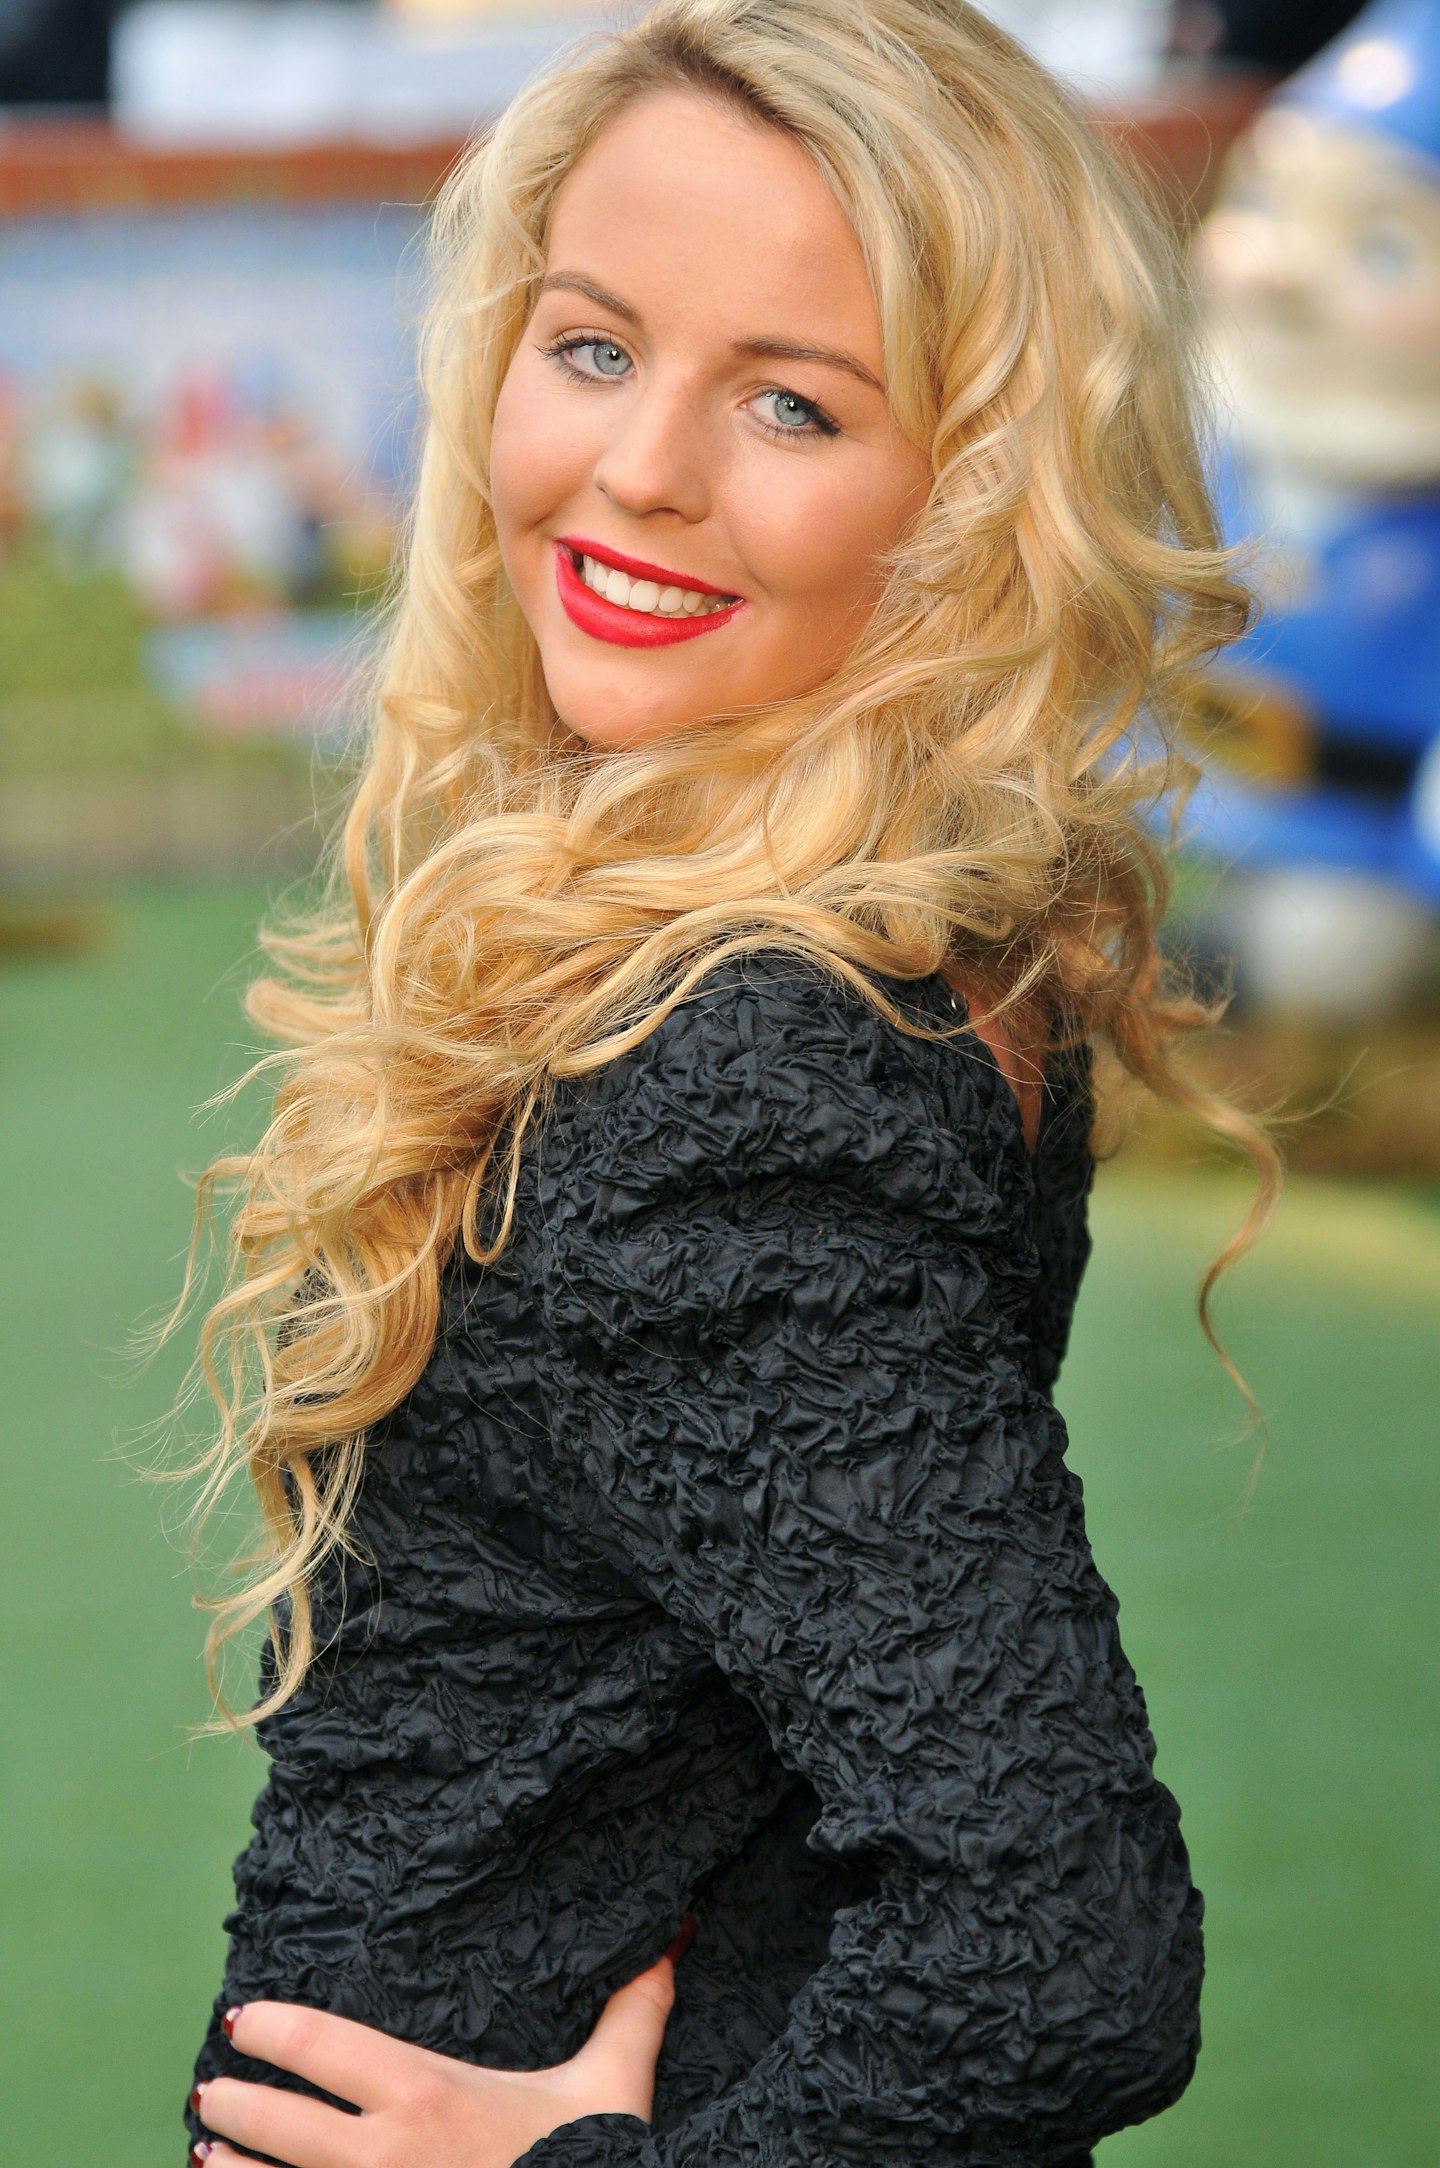 Lydia at the 'Gnomeo and Juliet' premiere